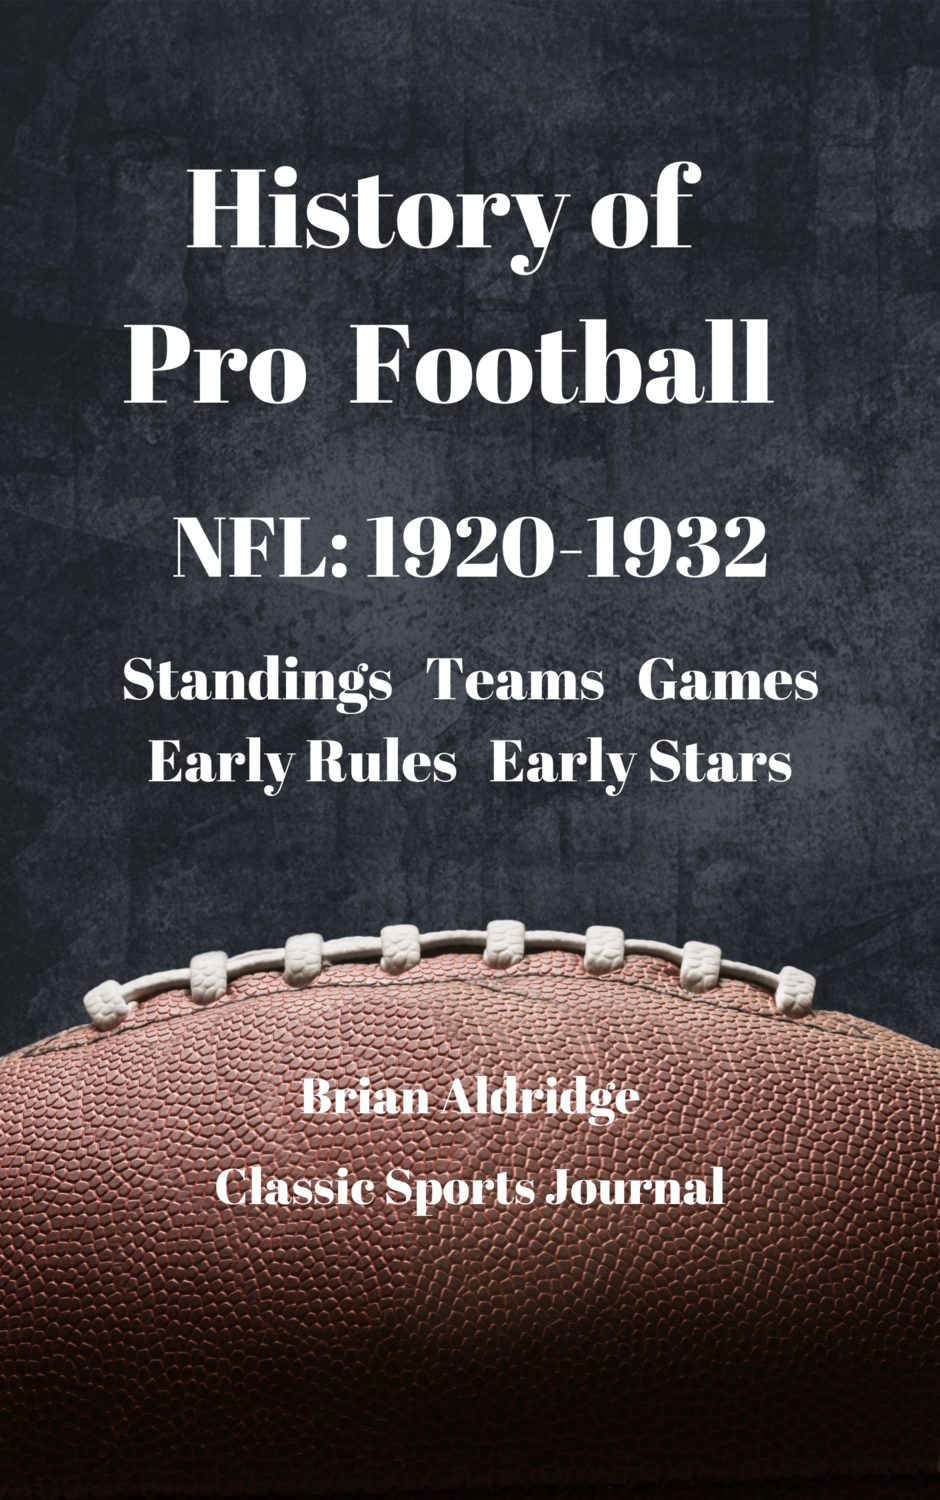 History of the NFL 1920-1932